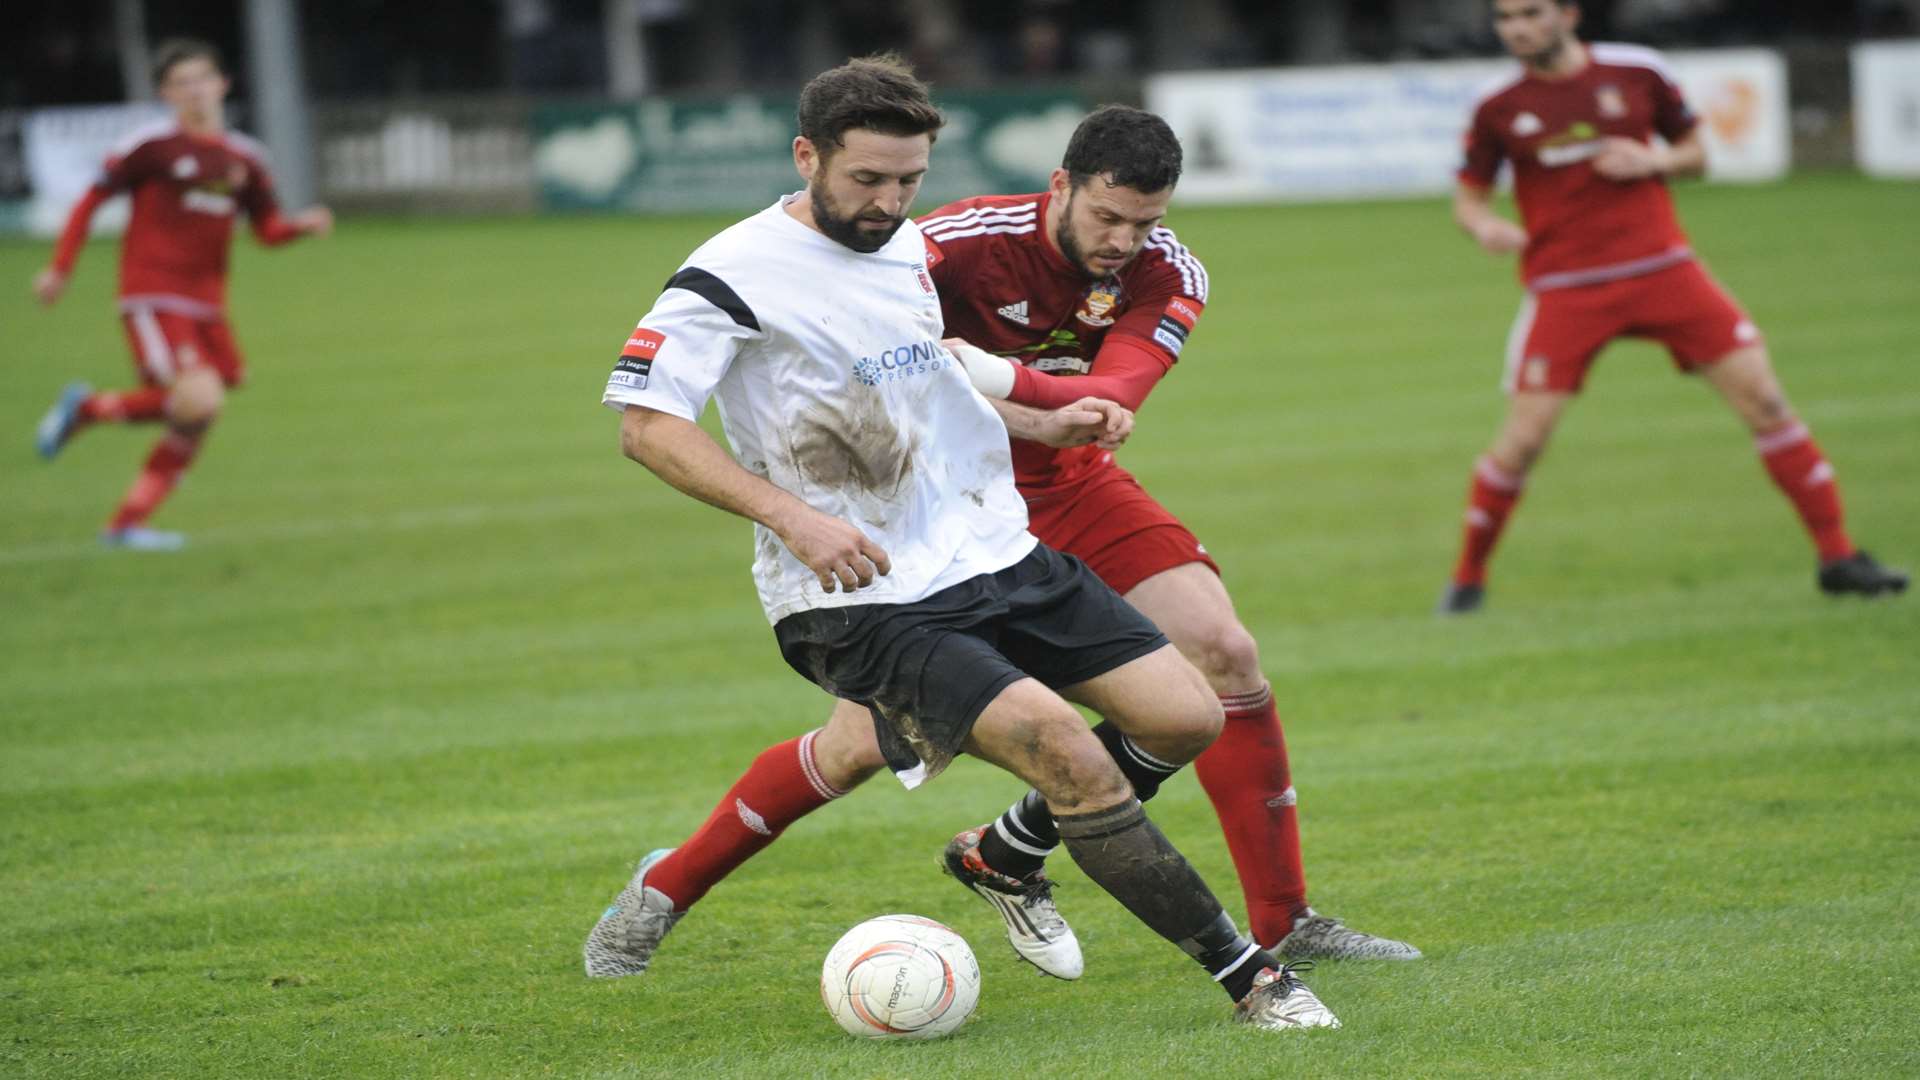 King in action for Faversham